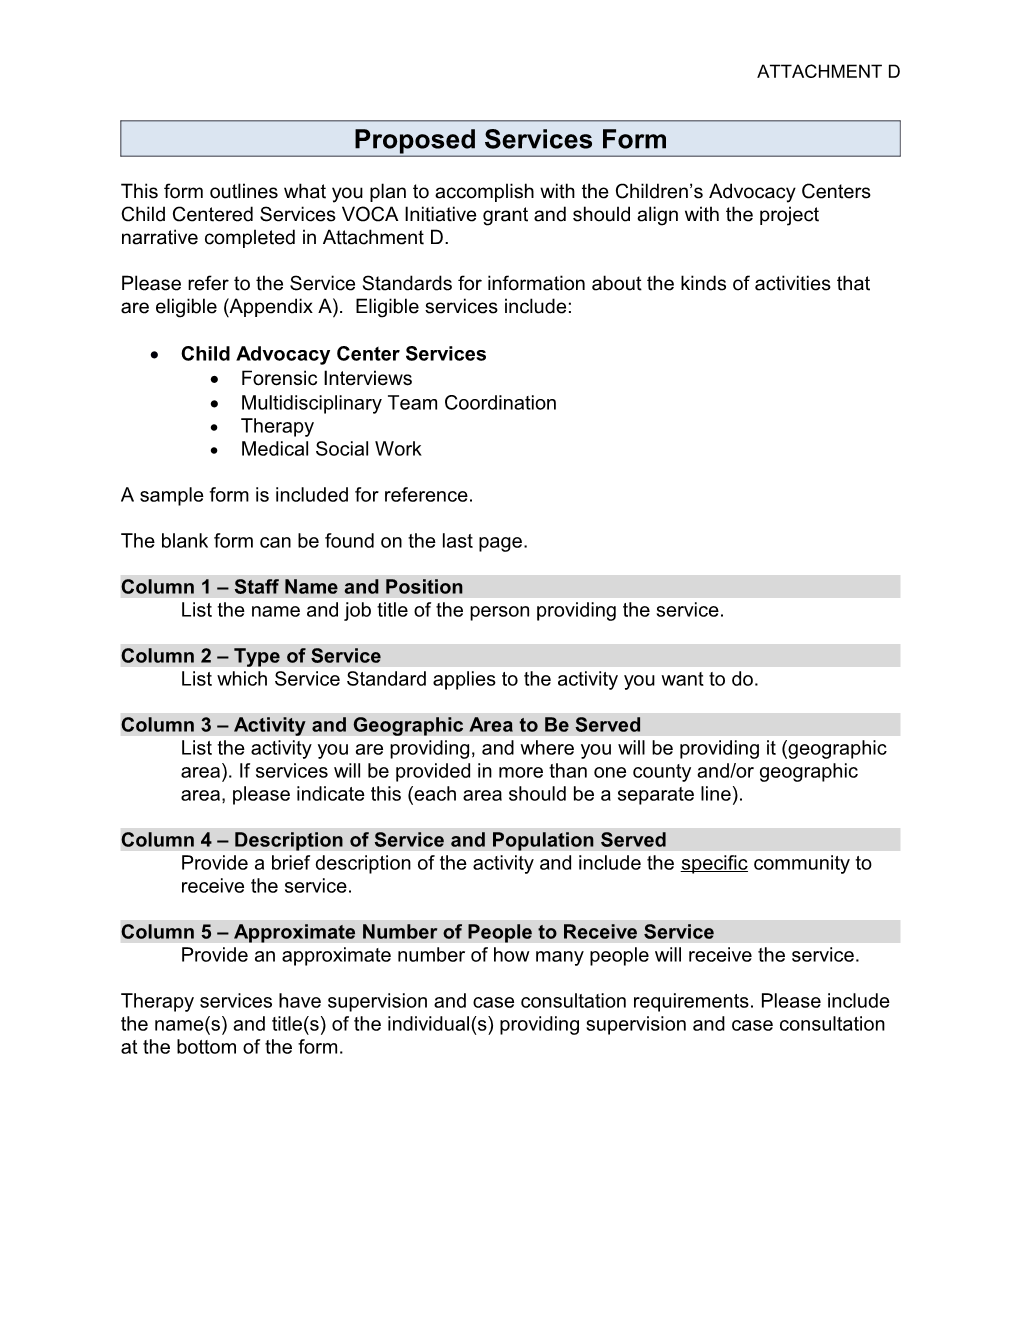 Proposed Services Form